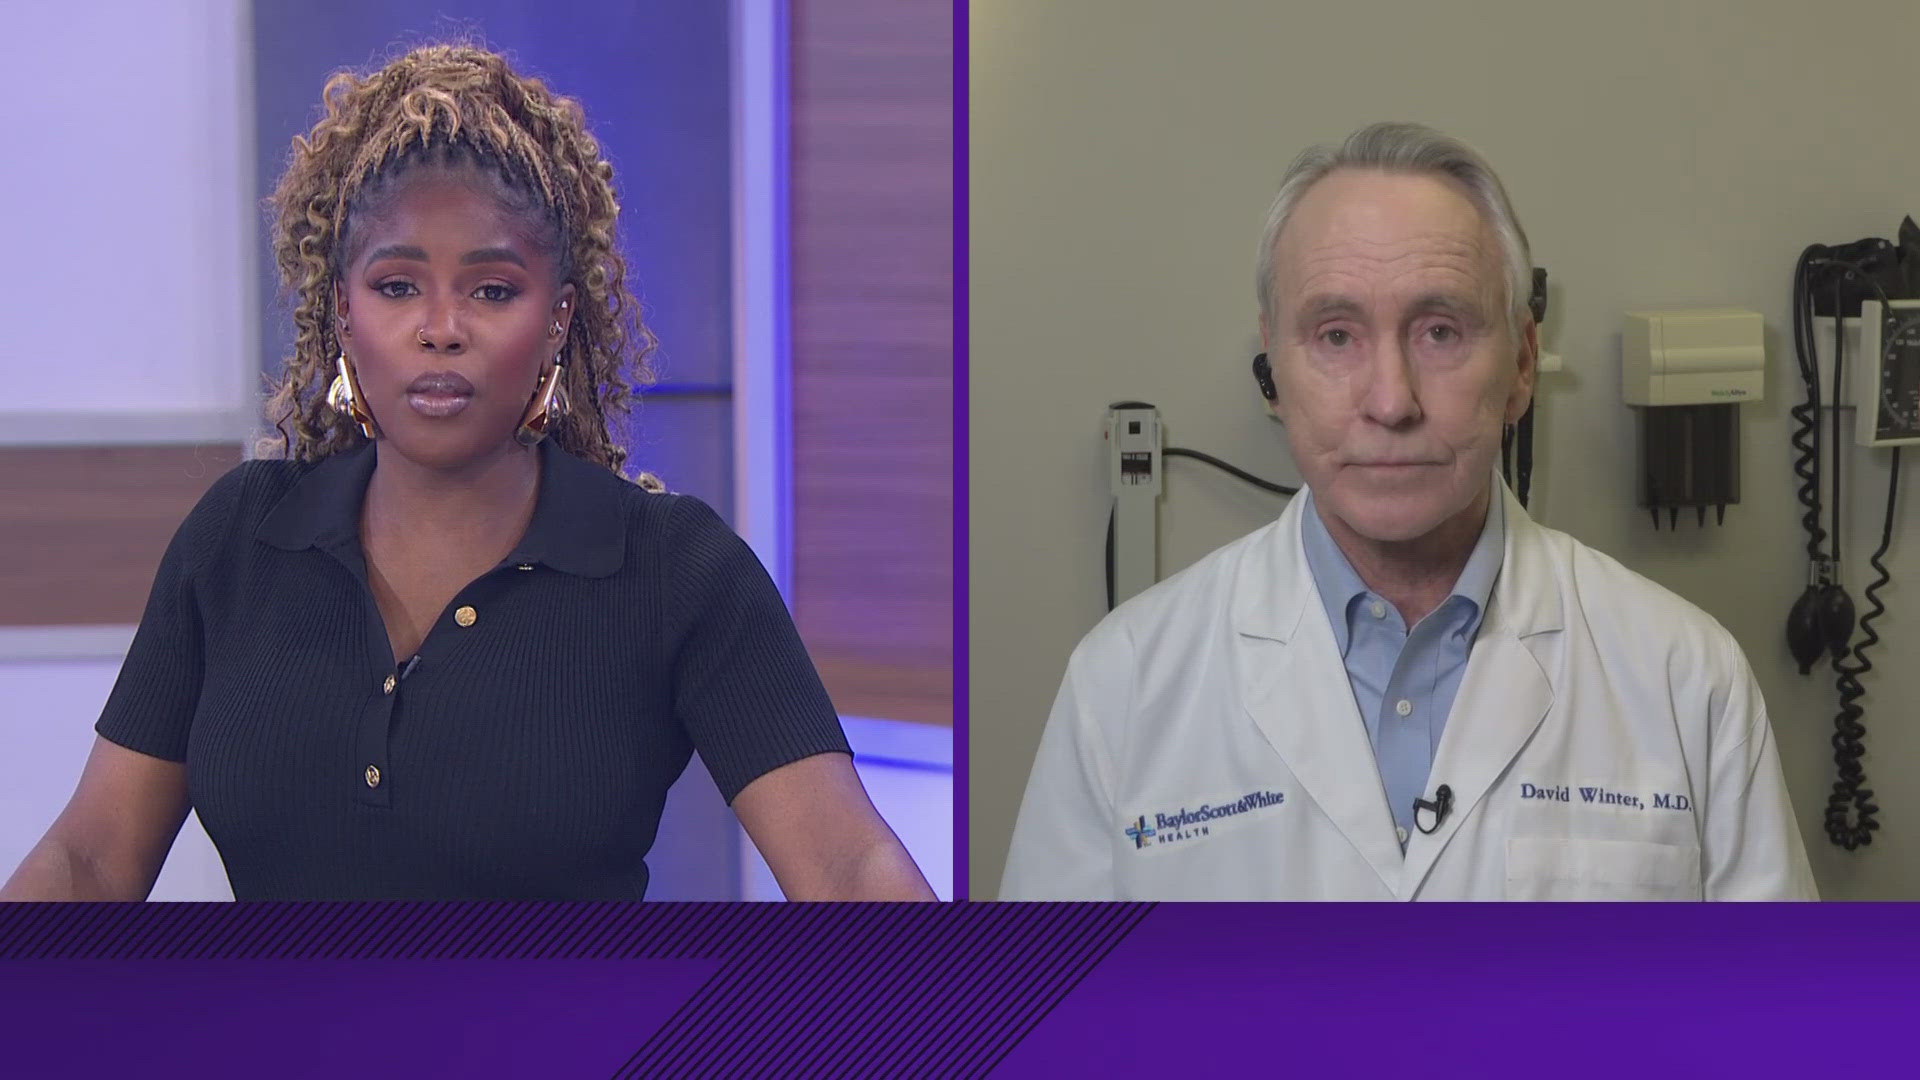 Dr. David Winter joined WFAA for a discussion on the increase in cancer cases in the U.S.